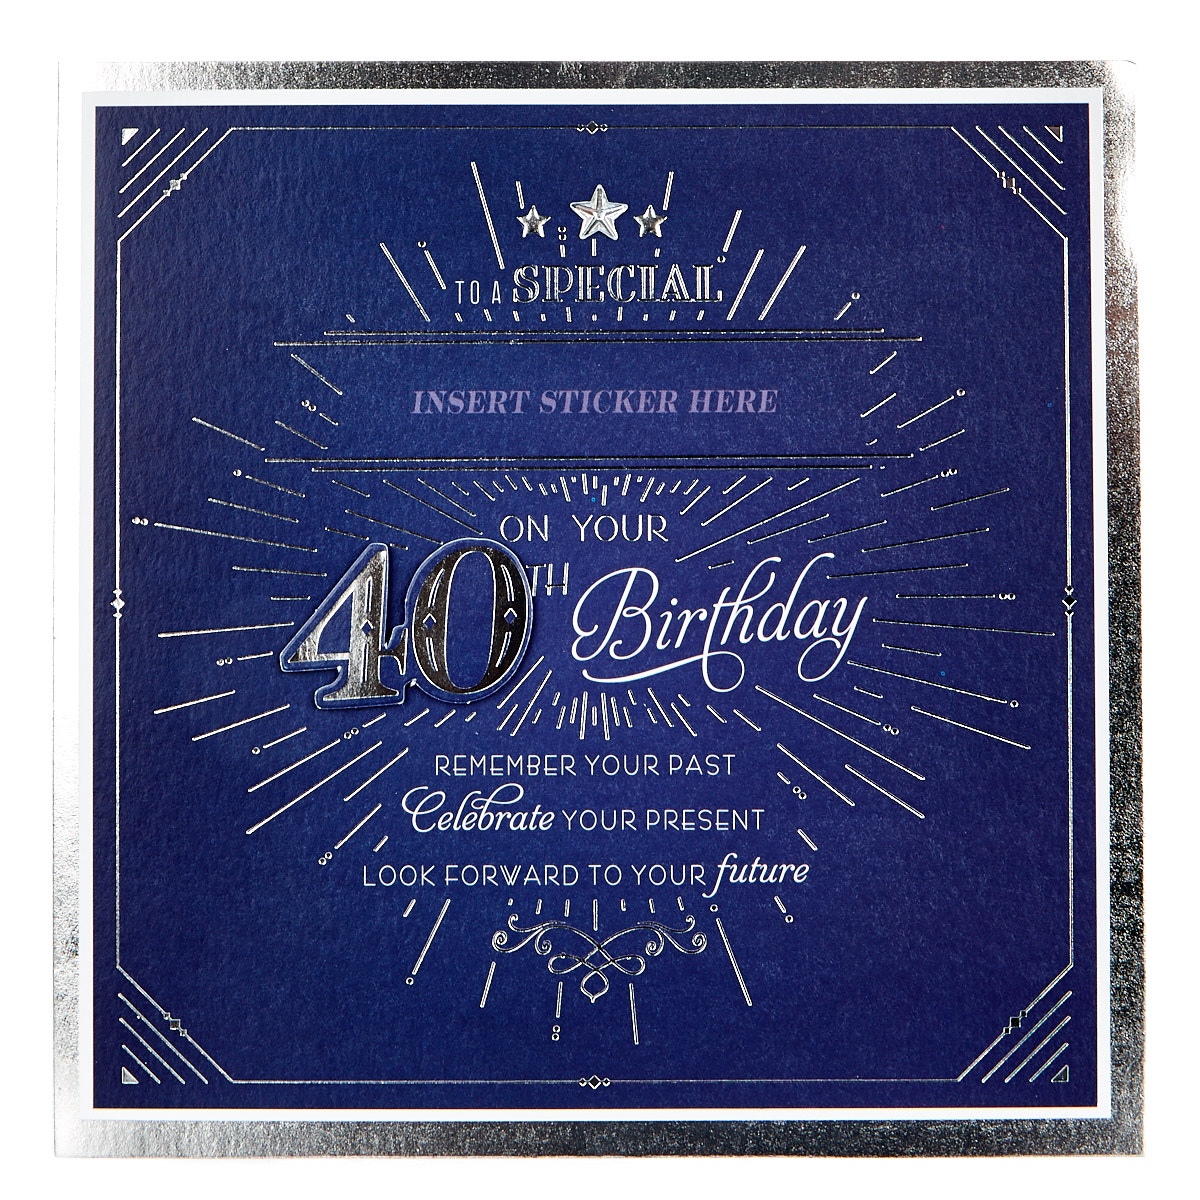 Exquisite Collection 40th Birthday Card - Any Male Recipient (Stickers Included)